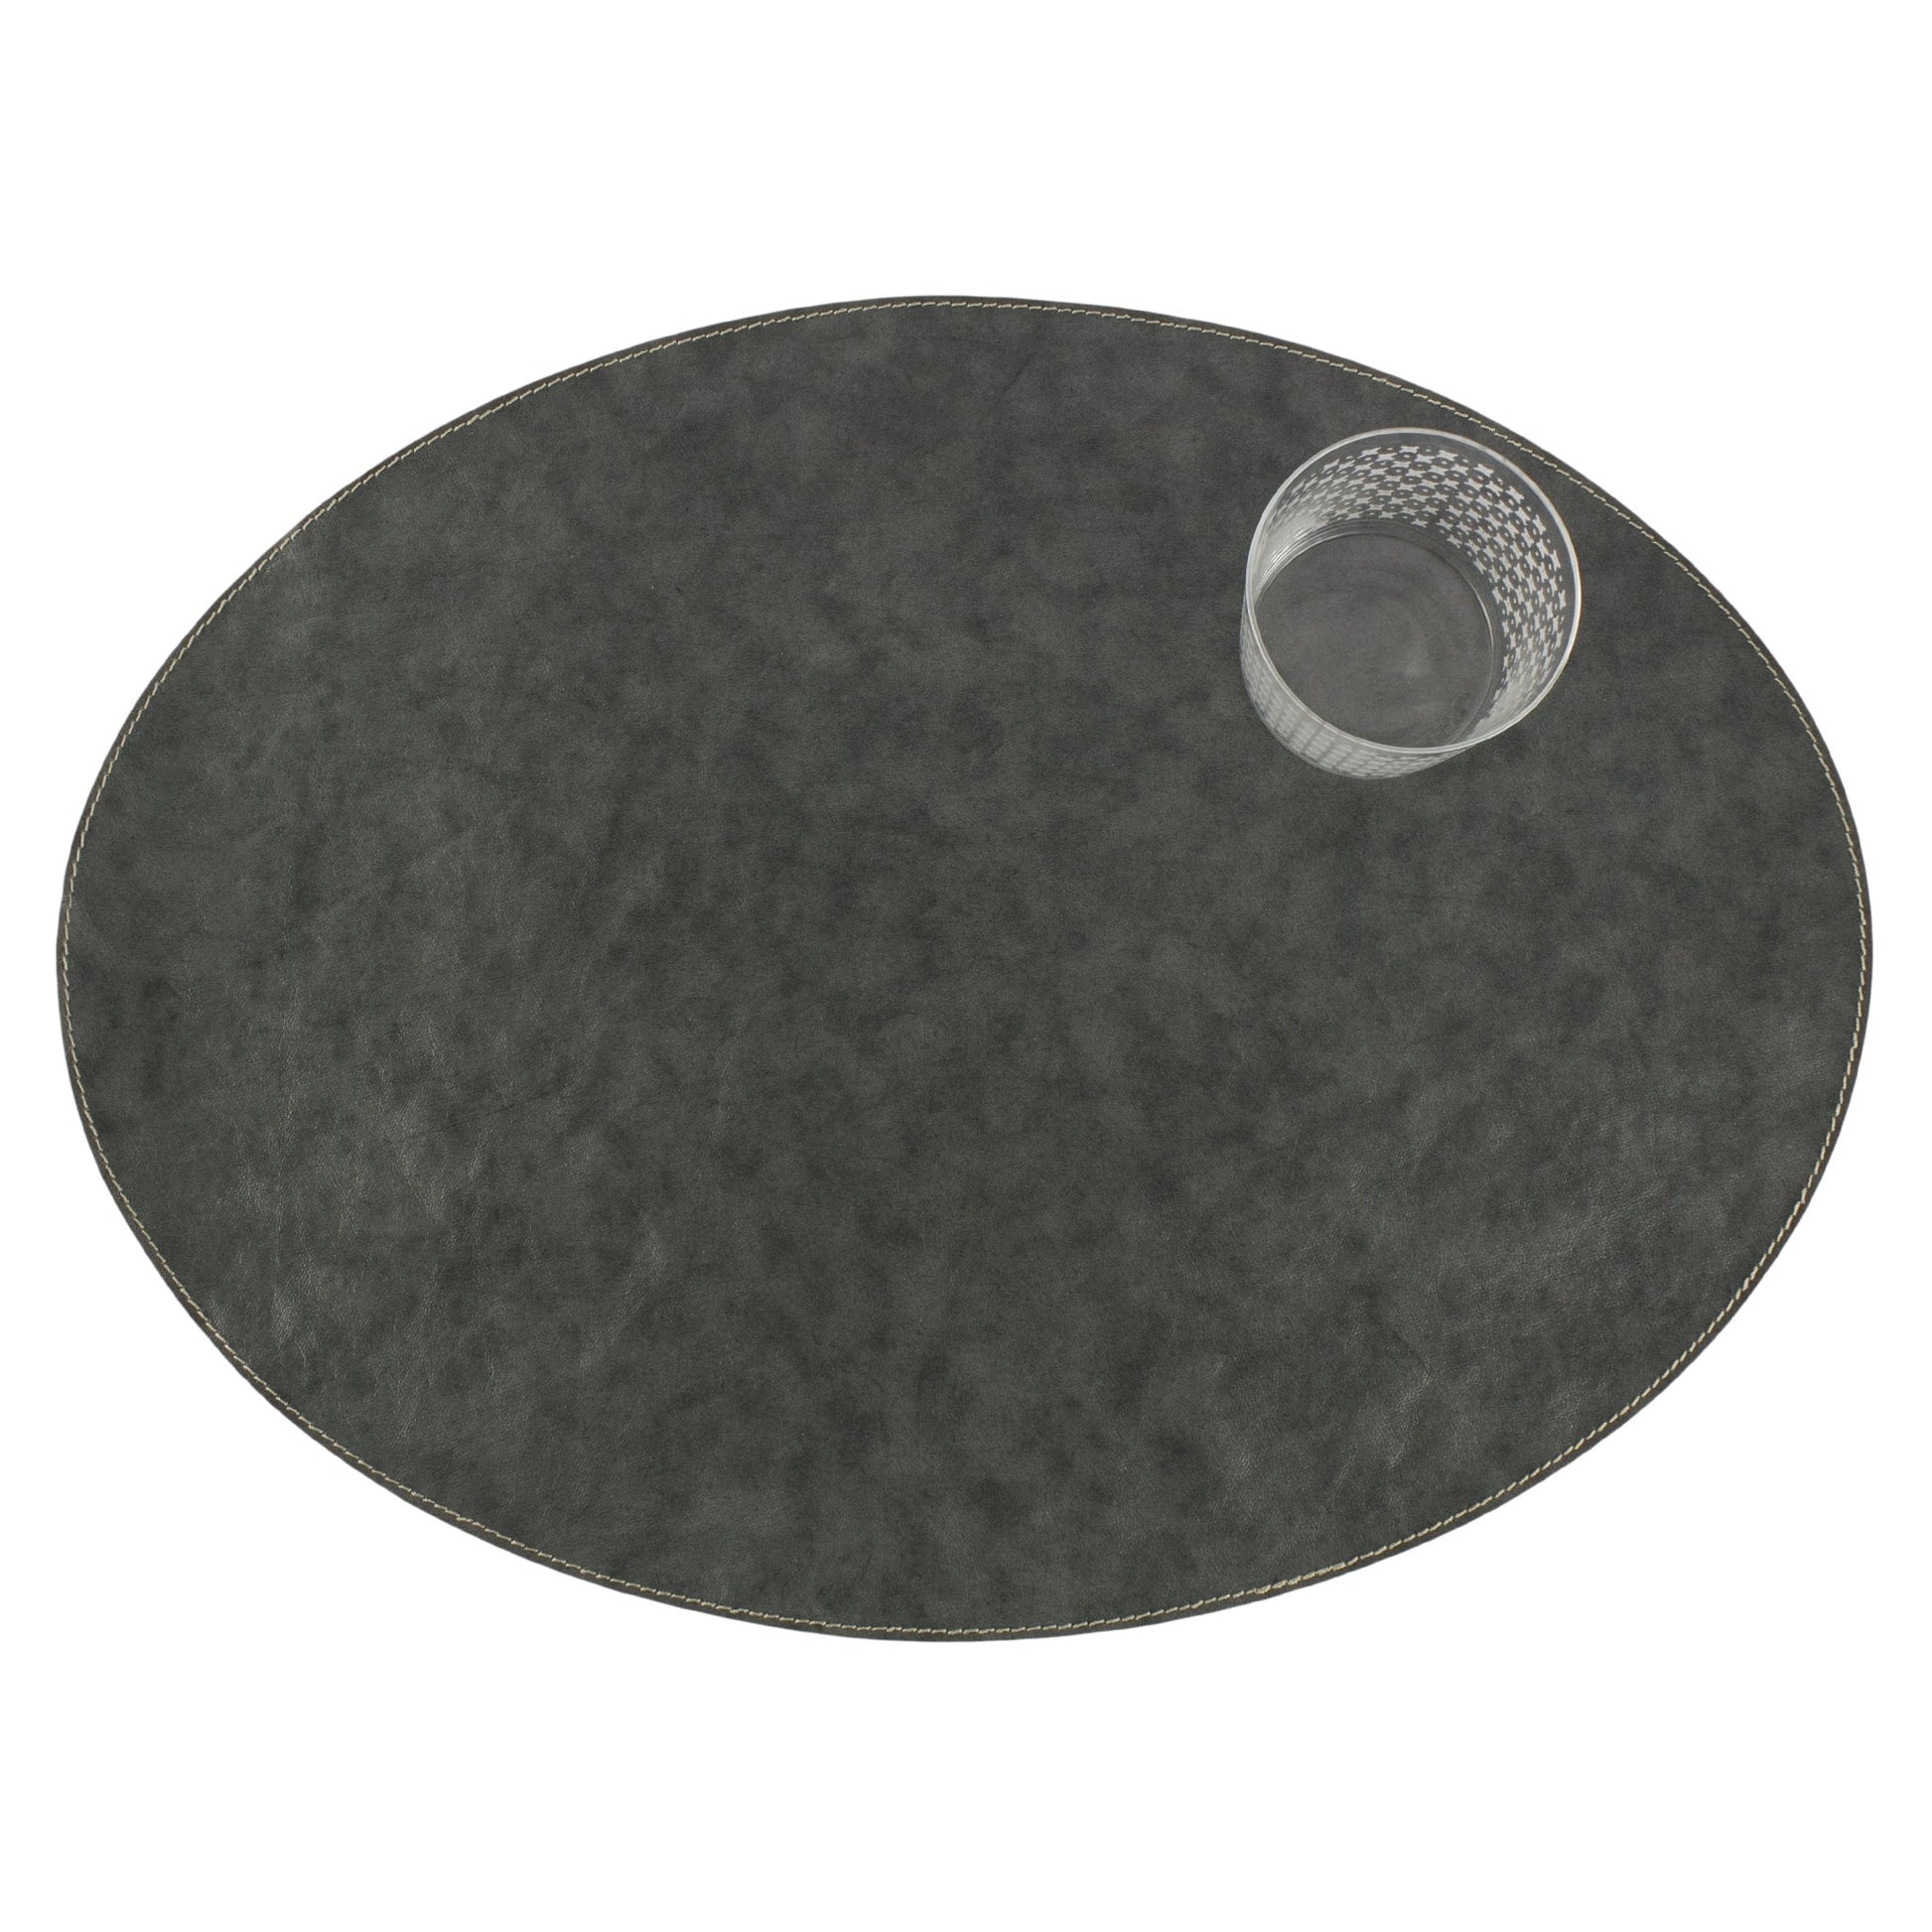 An oval washable paper placemats is shown with a small drinking glass in the upper right hand corner. The placemat shown is dark grey.